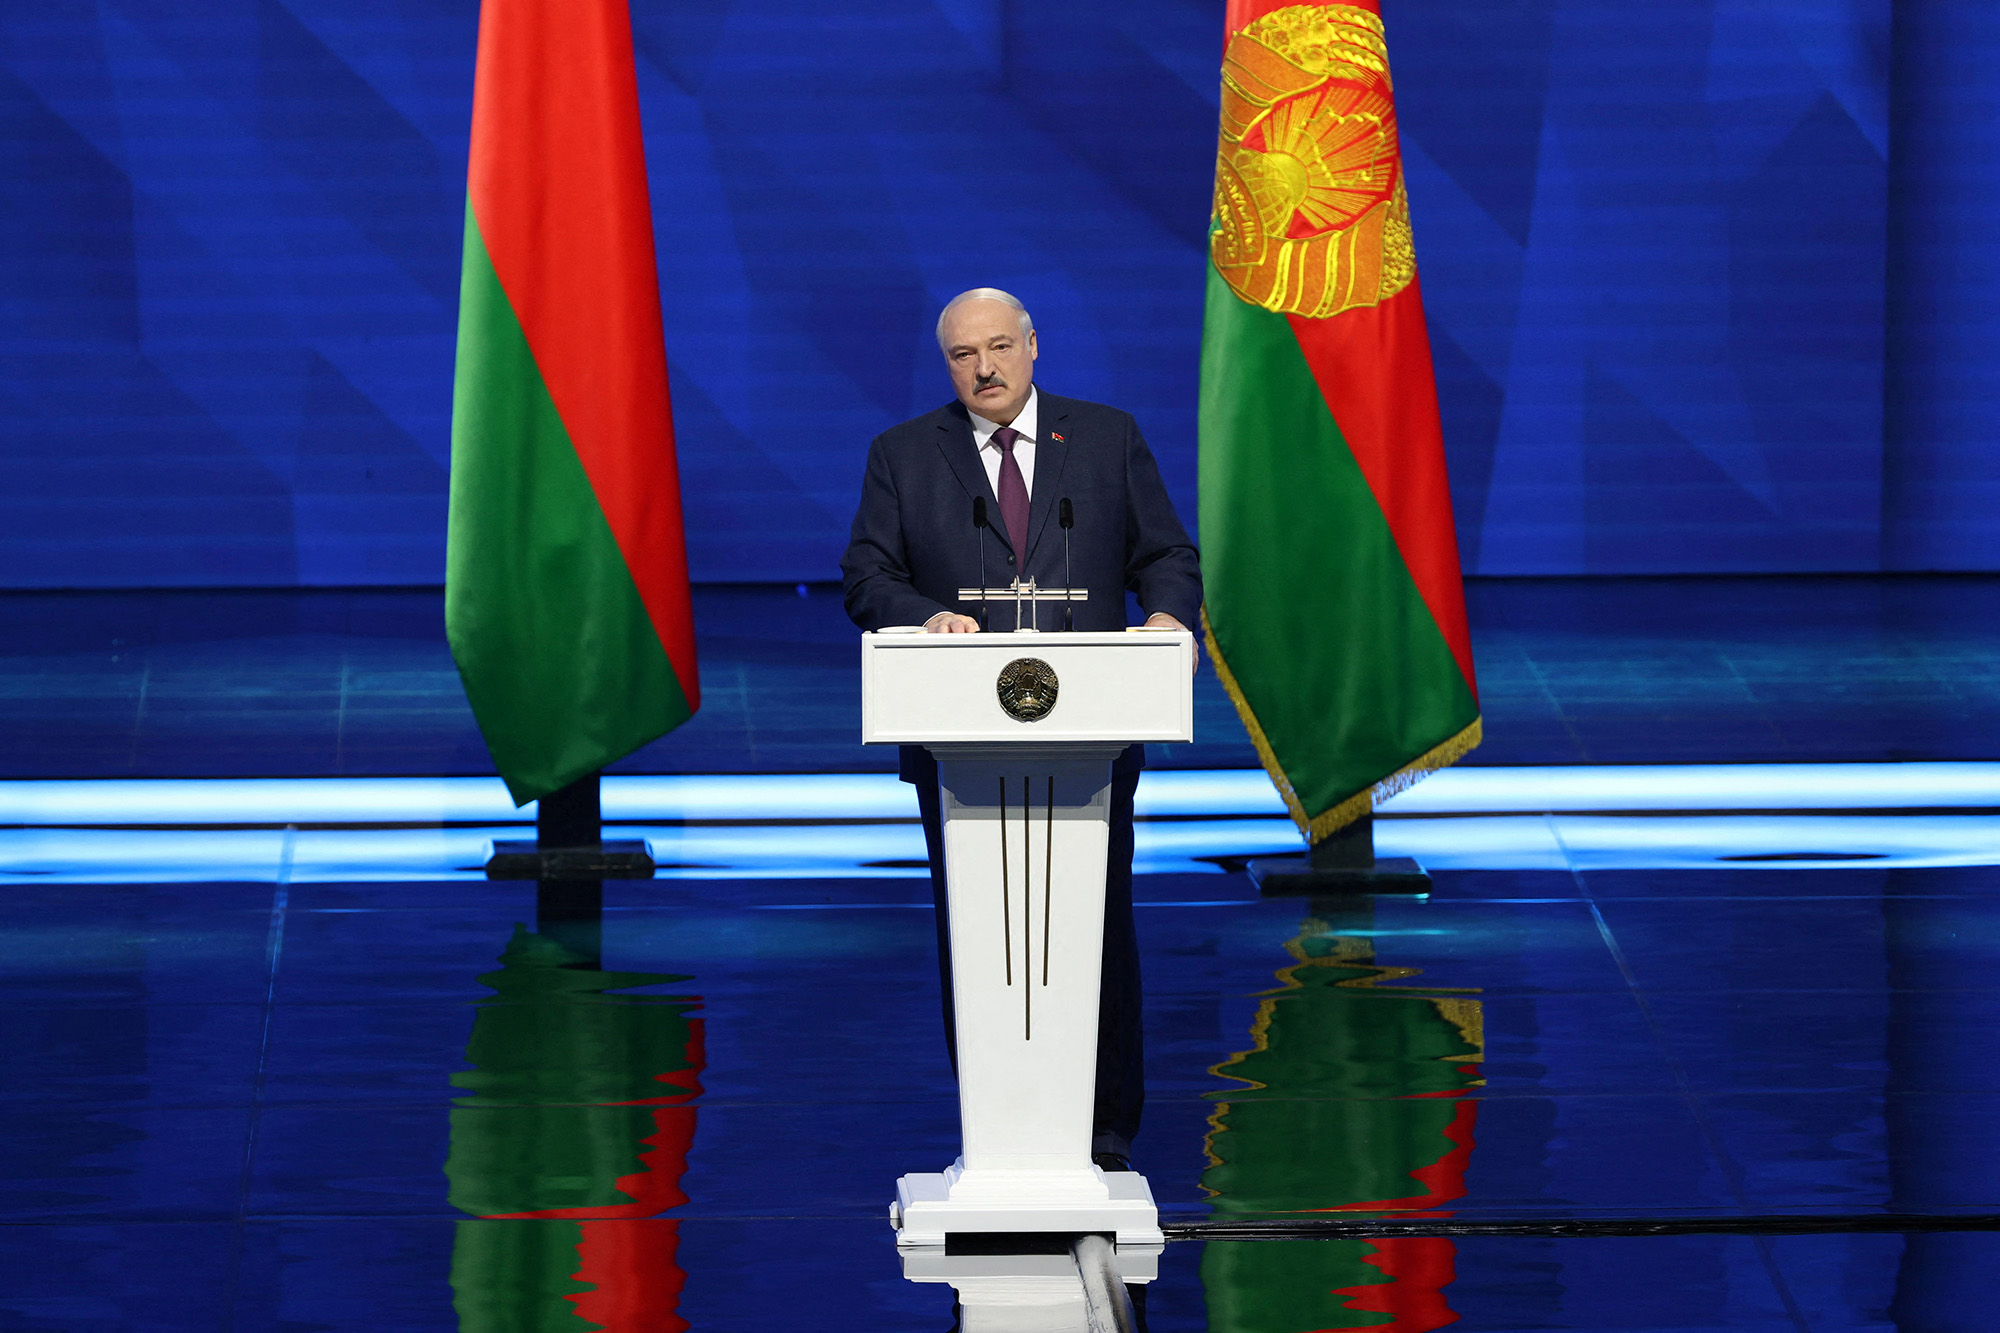 Belarusian President Alexander Lukashenko delivers an annual address to parliament, government and the nation in Minsk, Belarus, on March 31.